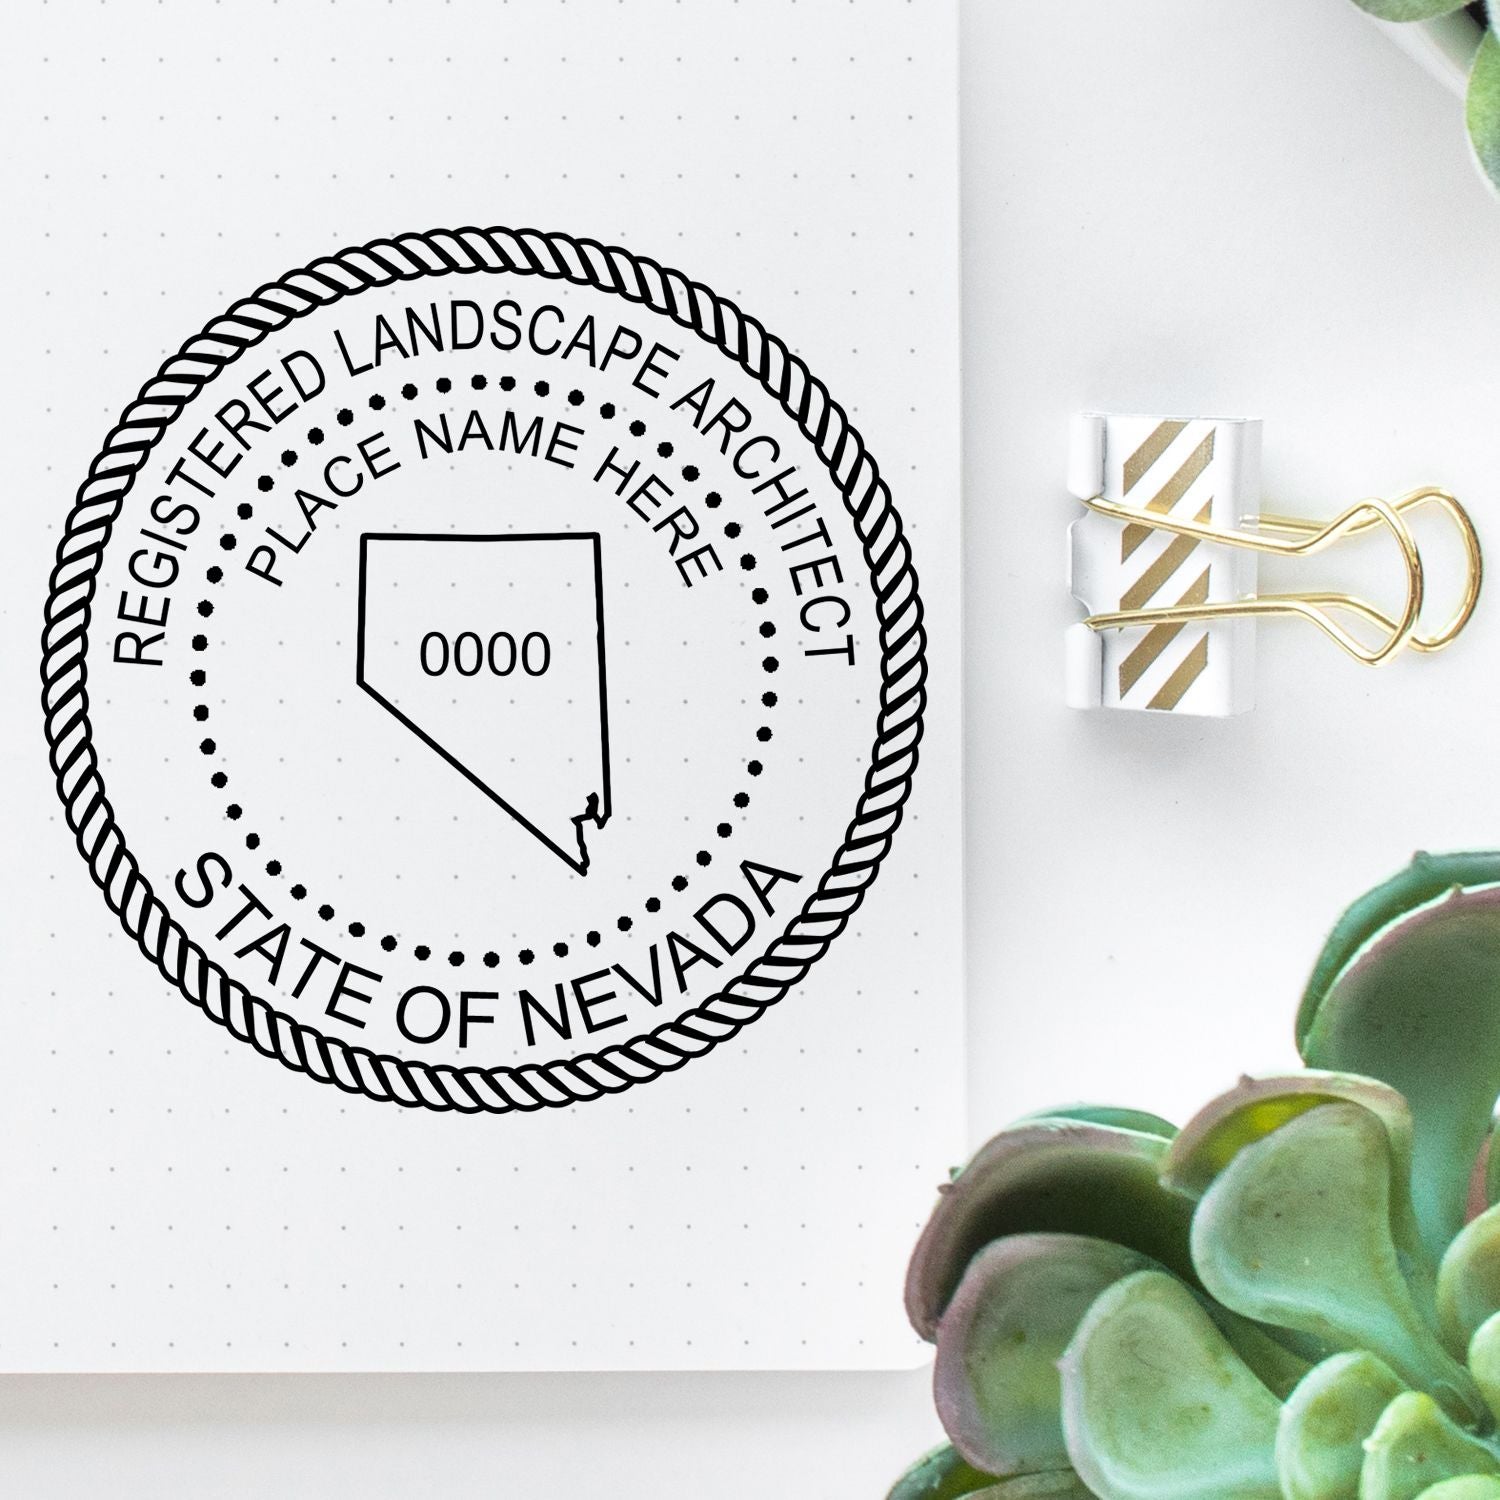 A stamped impression of the Digital Nevada Landscape Architect Stamp in this stylish lifestyle photo, setting the tone for a unique and personalized product.